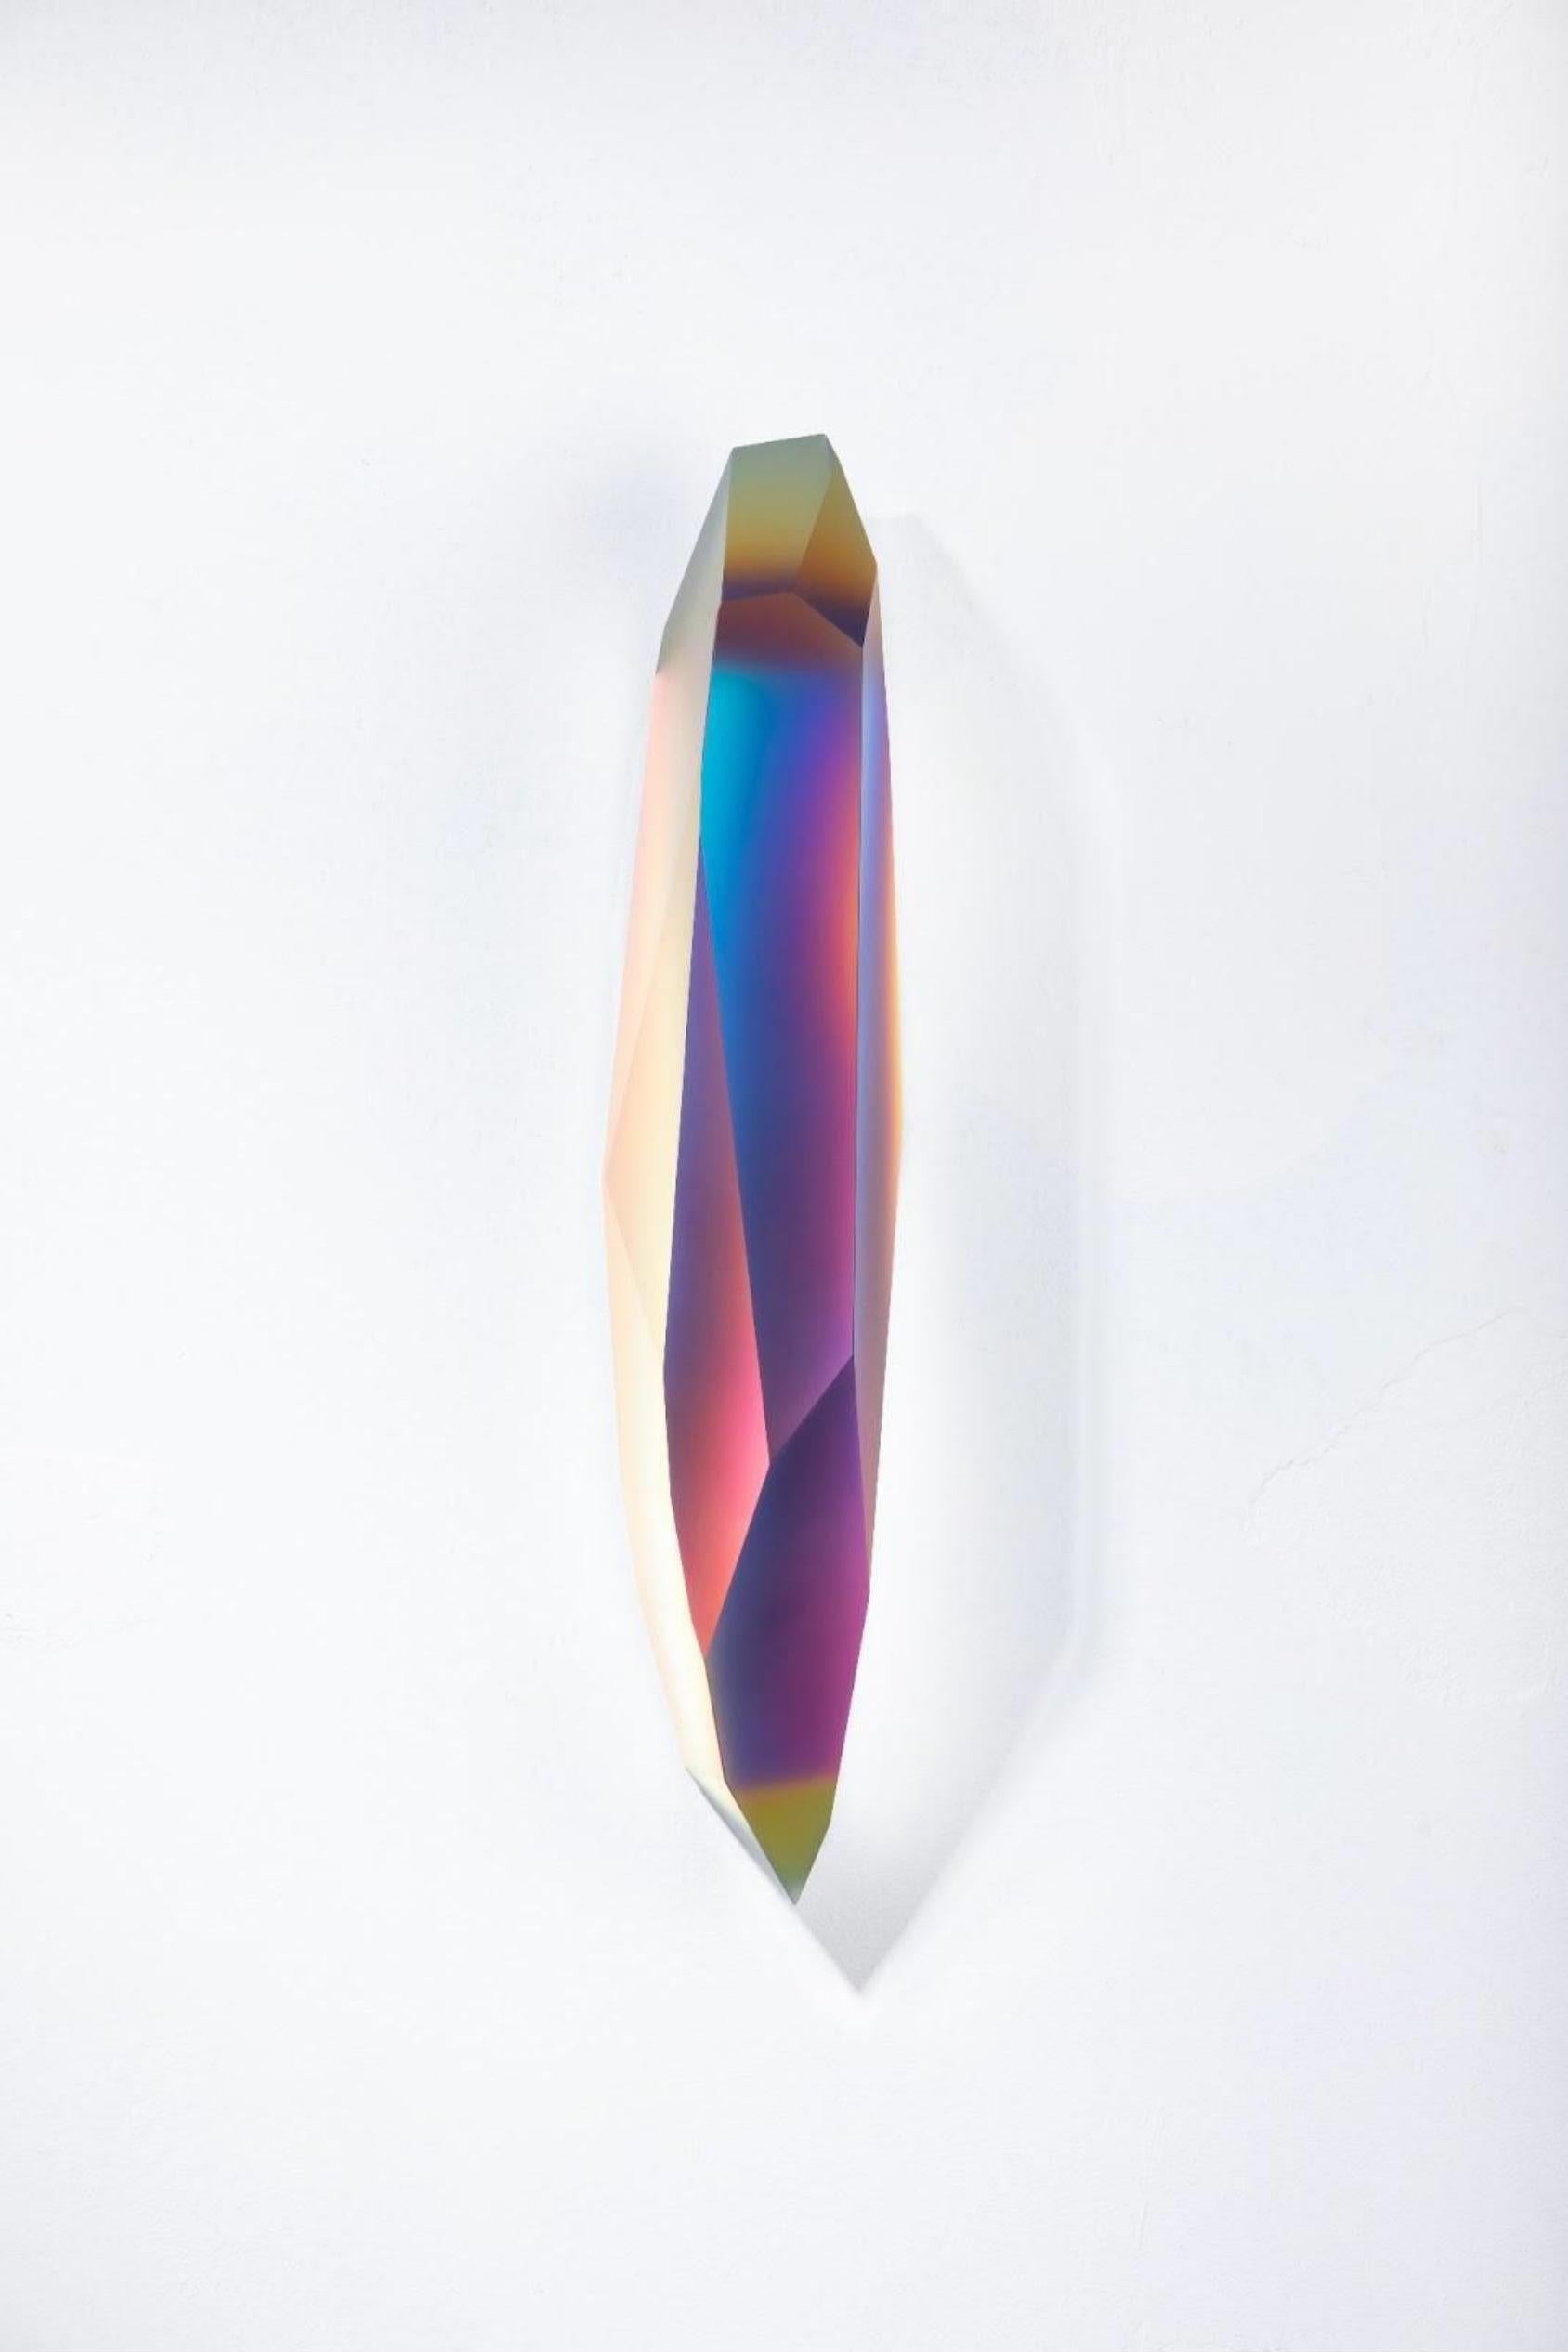 Pretty Mirage 0205 by Lukas Novak
Dimensions: W 16 x D 16 x H 63 cm
Materials: Cut Glass, Crystal, Color Gradient

The Pretty Mirage series is made out of wall crystals. It is a unique composition of cuts in glass and a color gradient. Lukas Novak